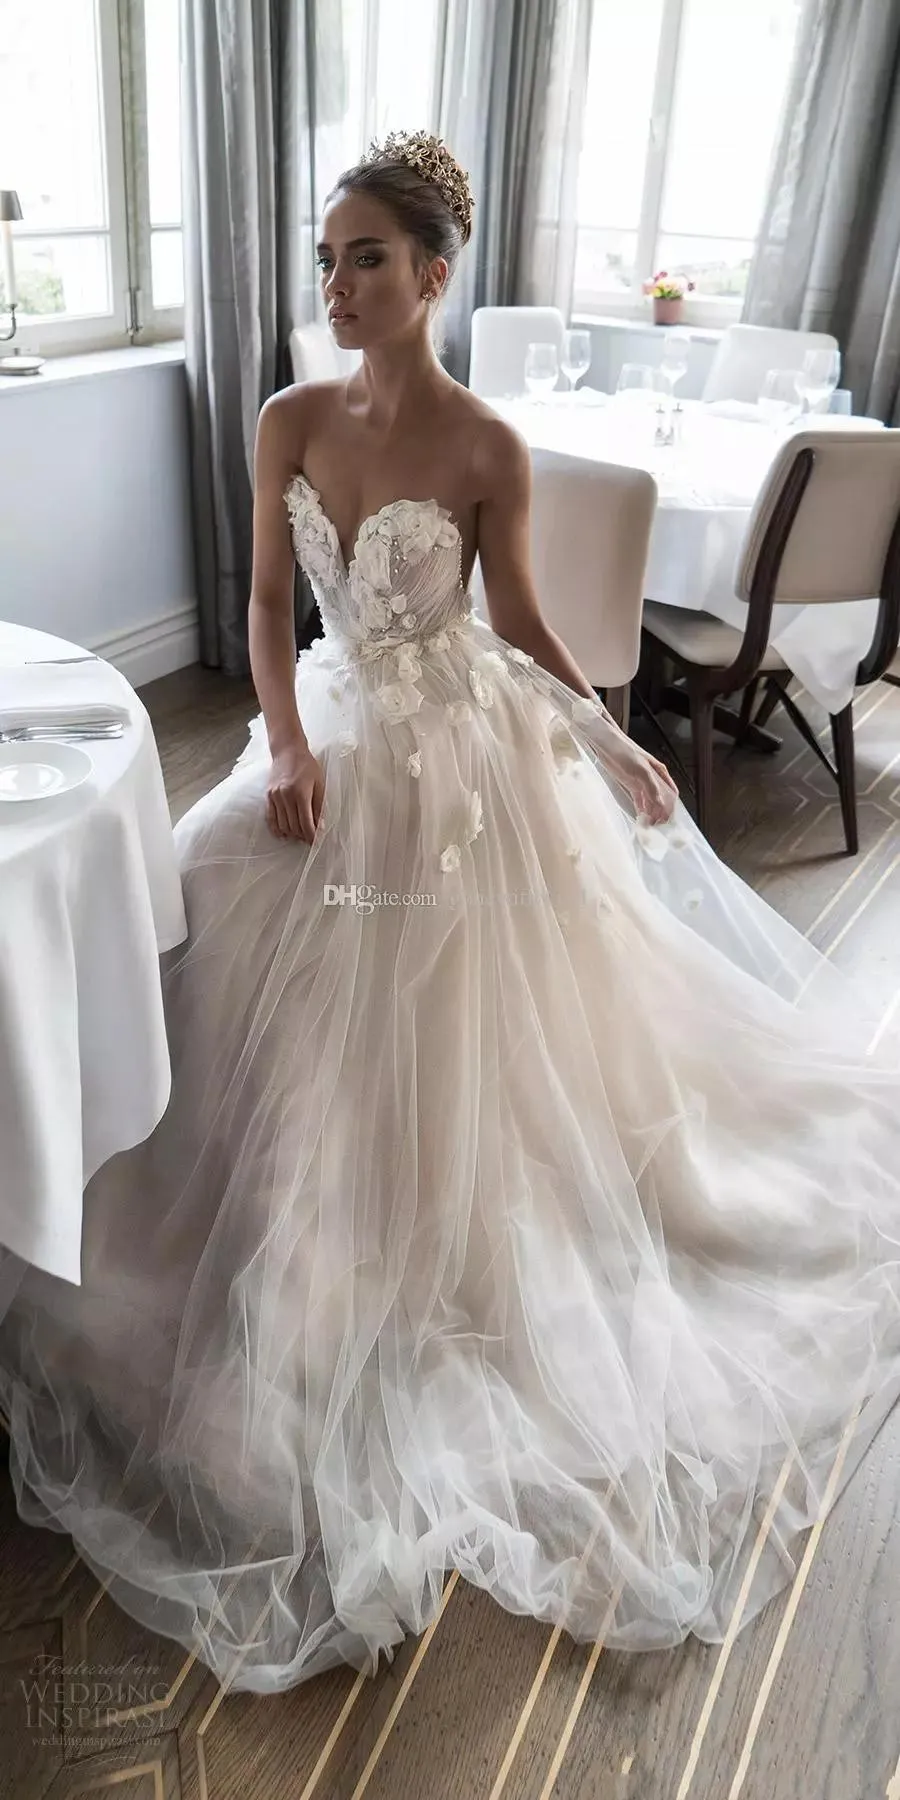 New Illusion Jewel Sweetheart Embellished Ruched Bodice Wedding Dresses Elihav Sasson Bridal Gown 3D Rose Flower Floor Length Wedding Gowns